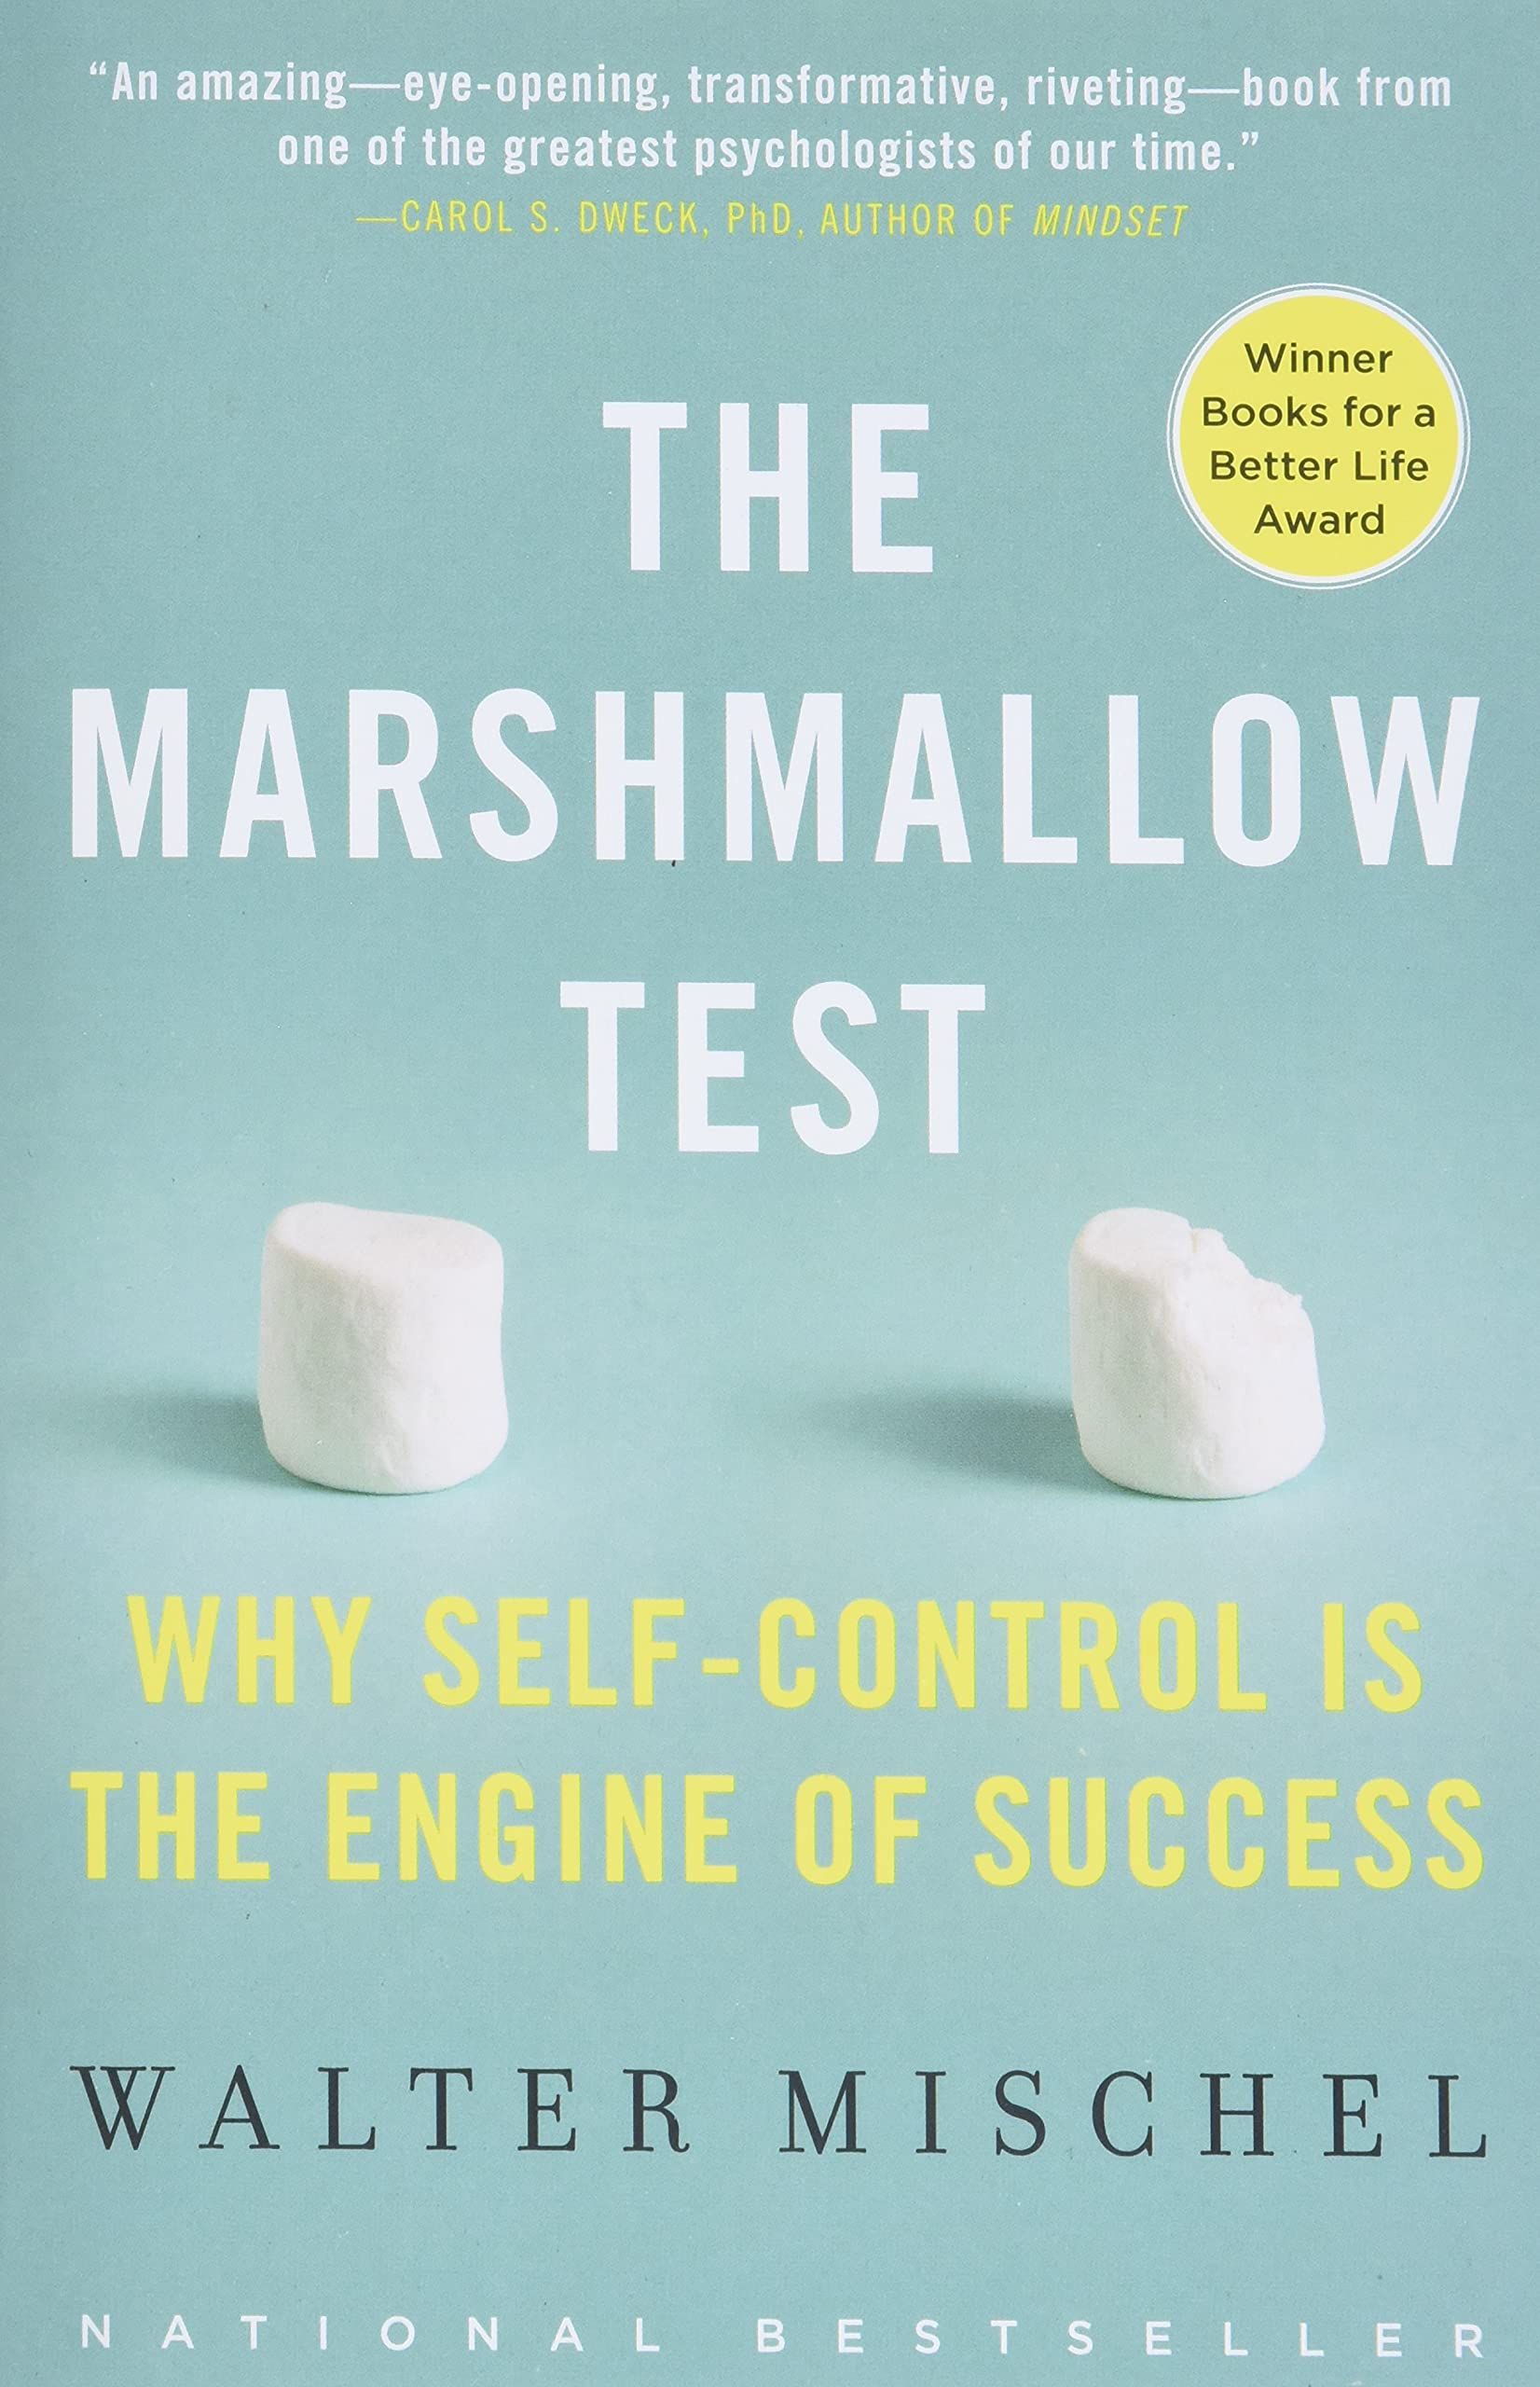 marshmallow test book cover